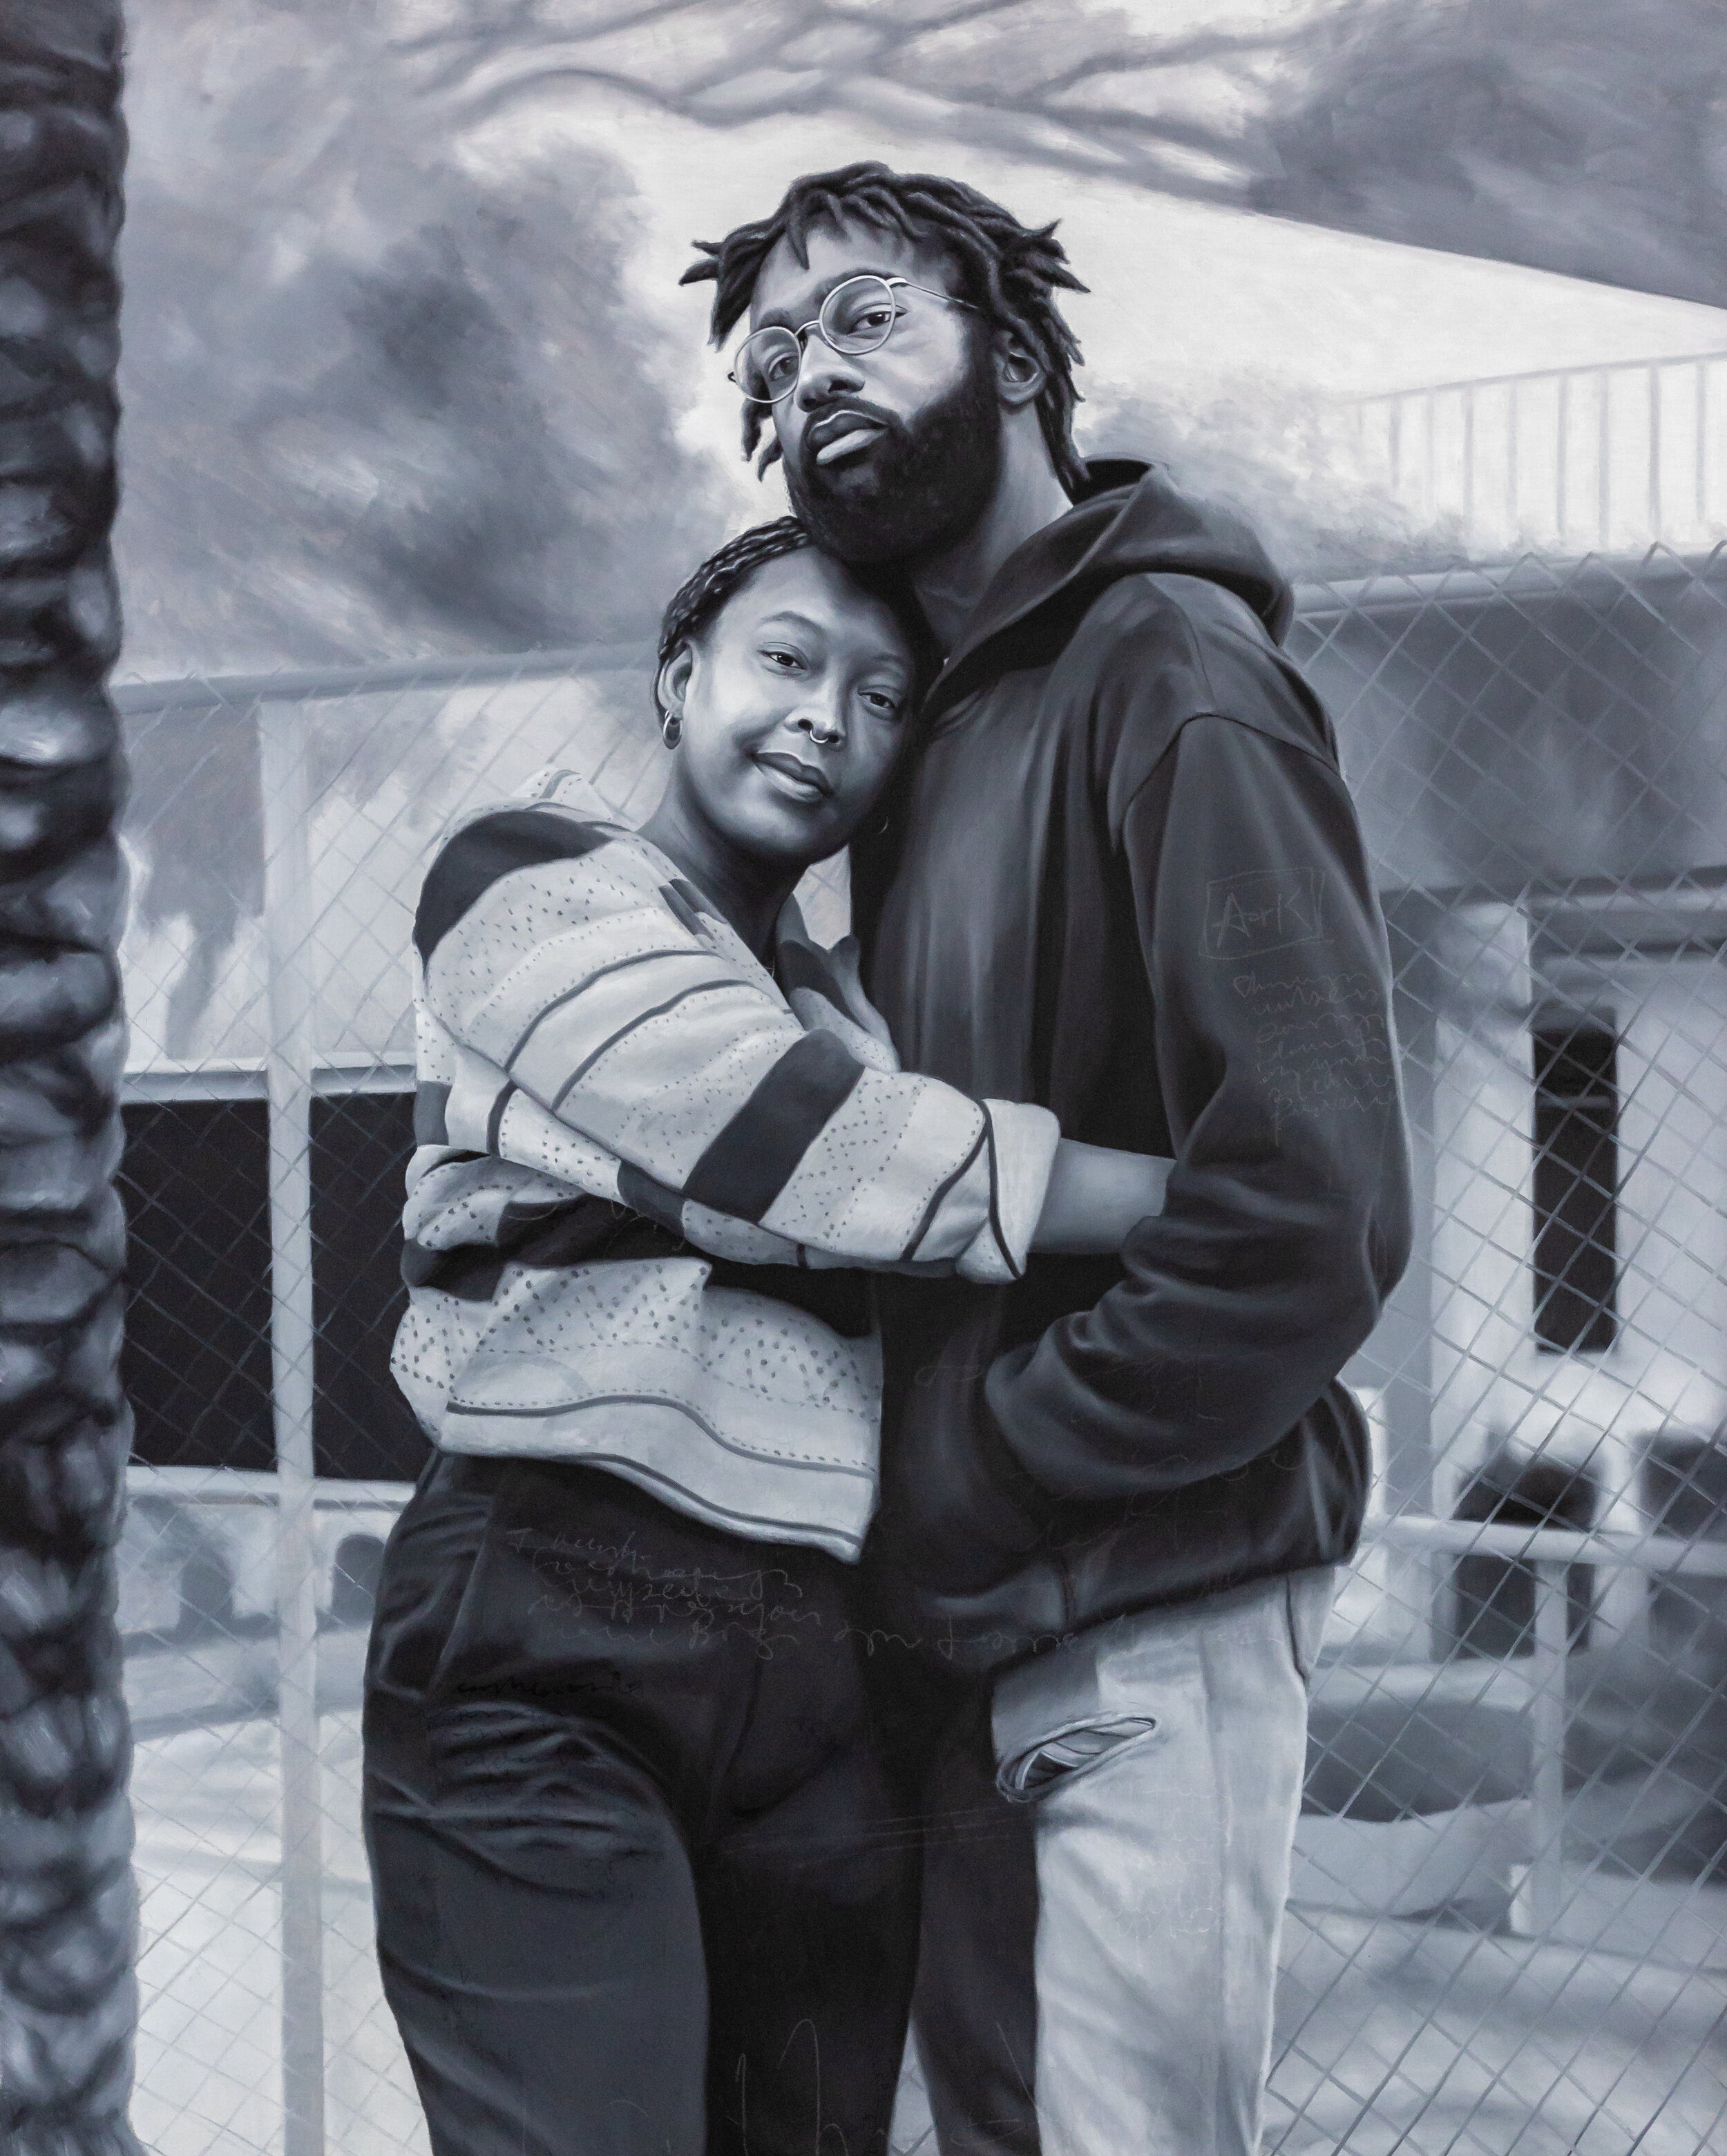   Adam and Kai  2020 oil on canvas 70 x 56 in. / 177.8 x 142.24 cm 